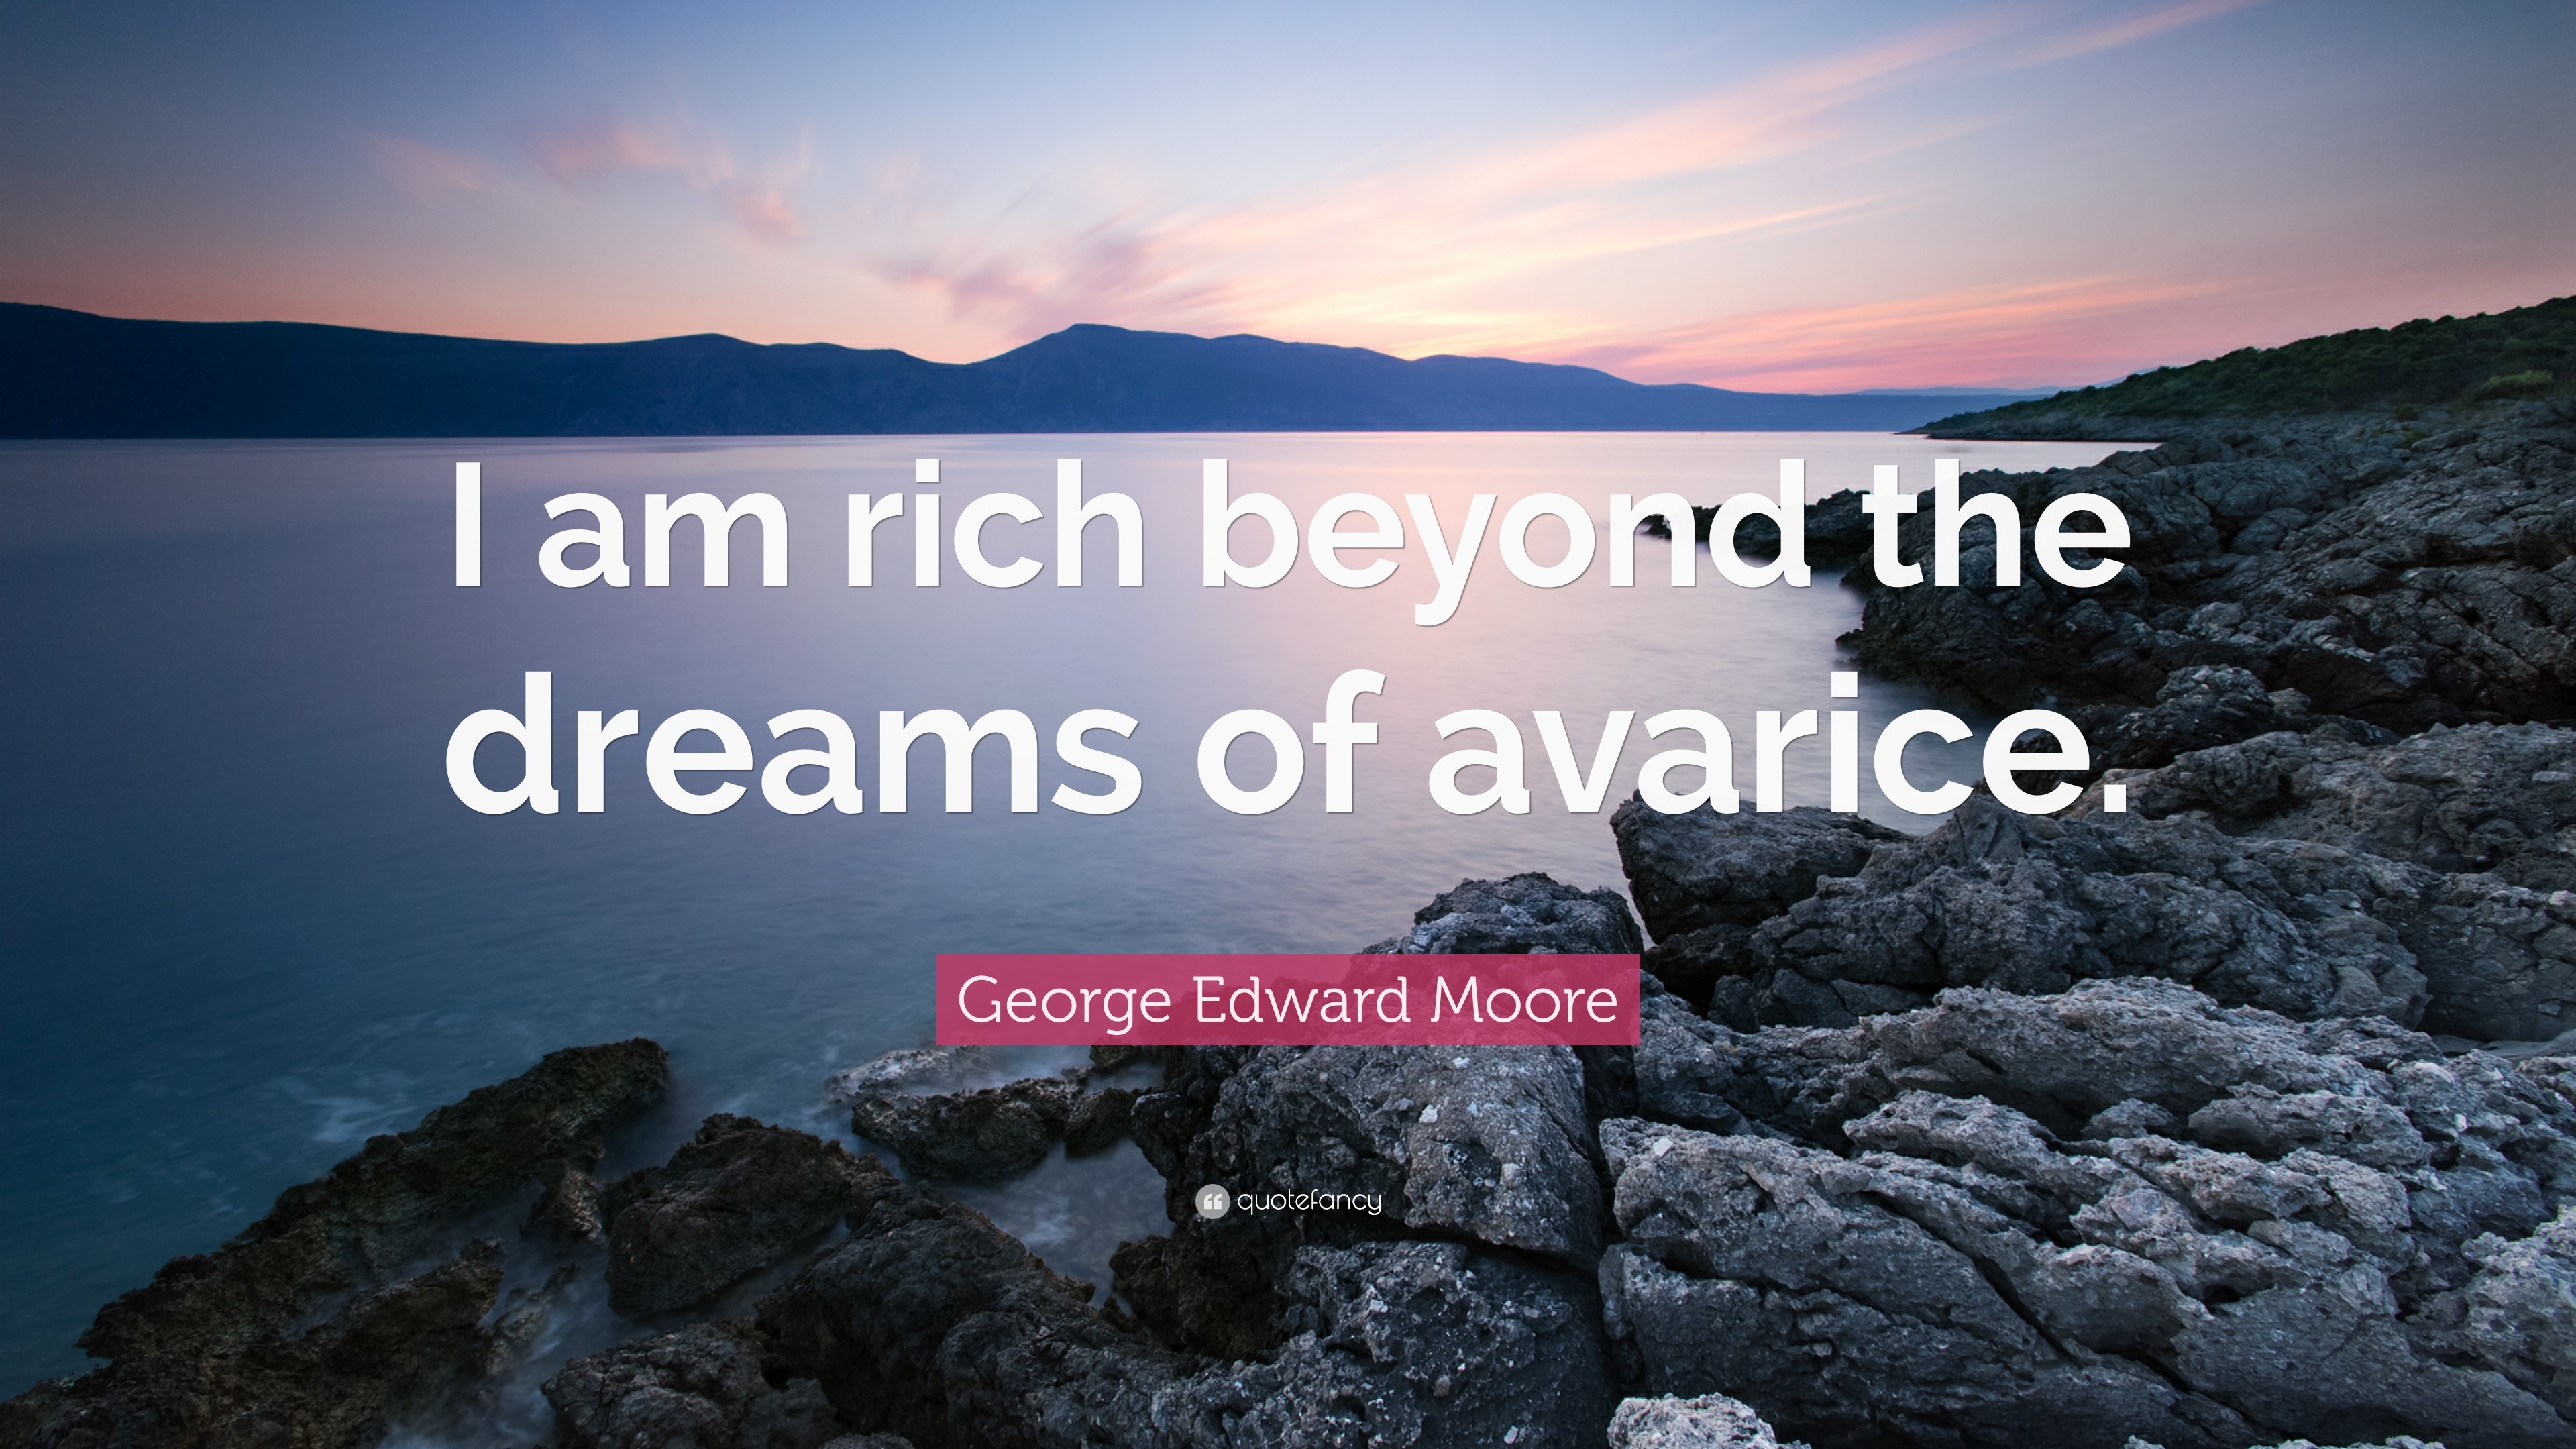 George Edward Moore Quote: “I am rich beyond the dreams of avarice.”